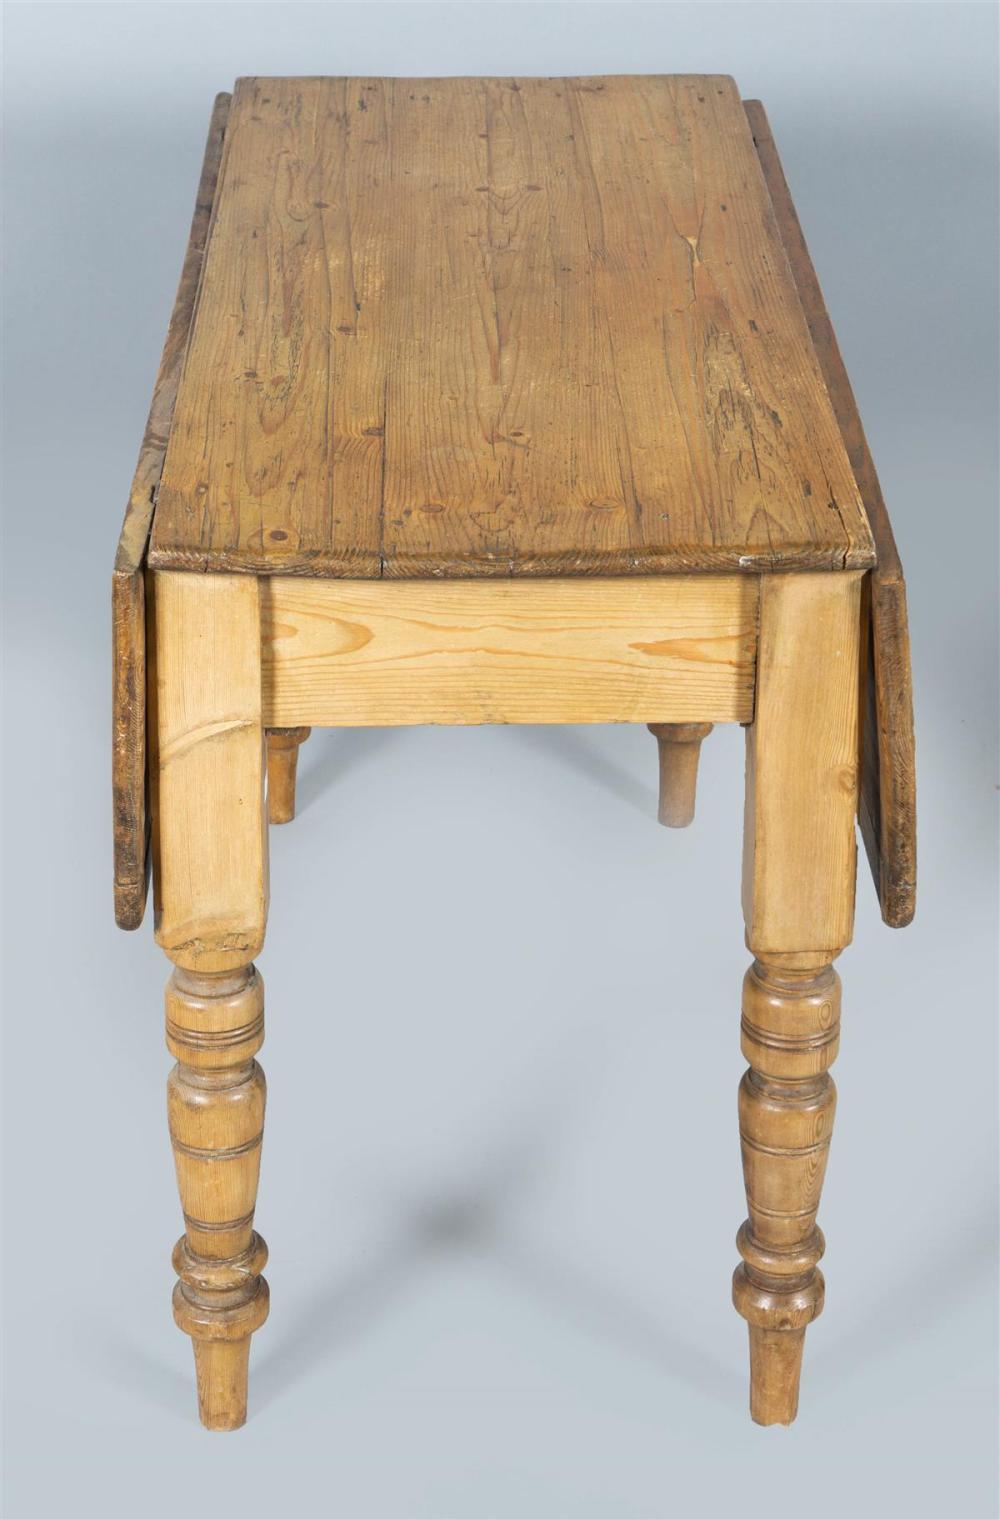 COUNTRY PINE DROP-LEAF TABLE 29